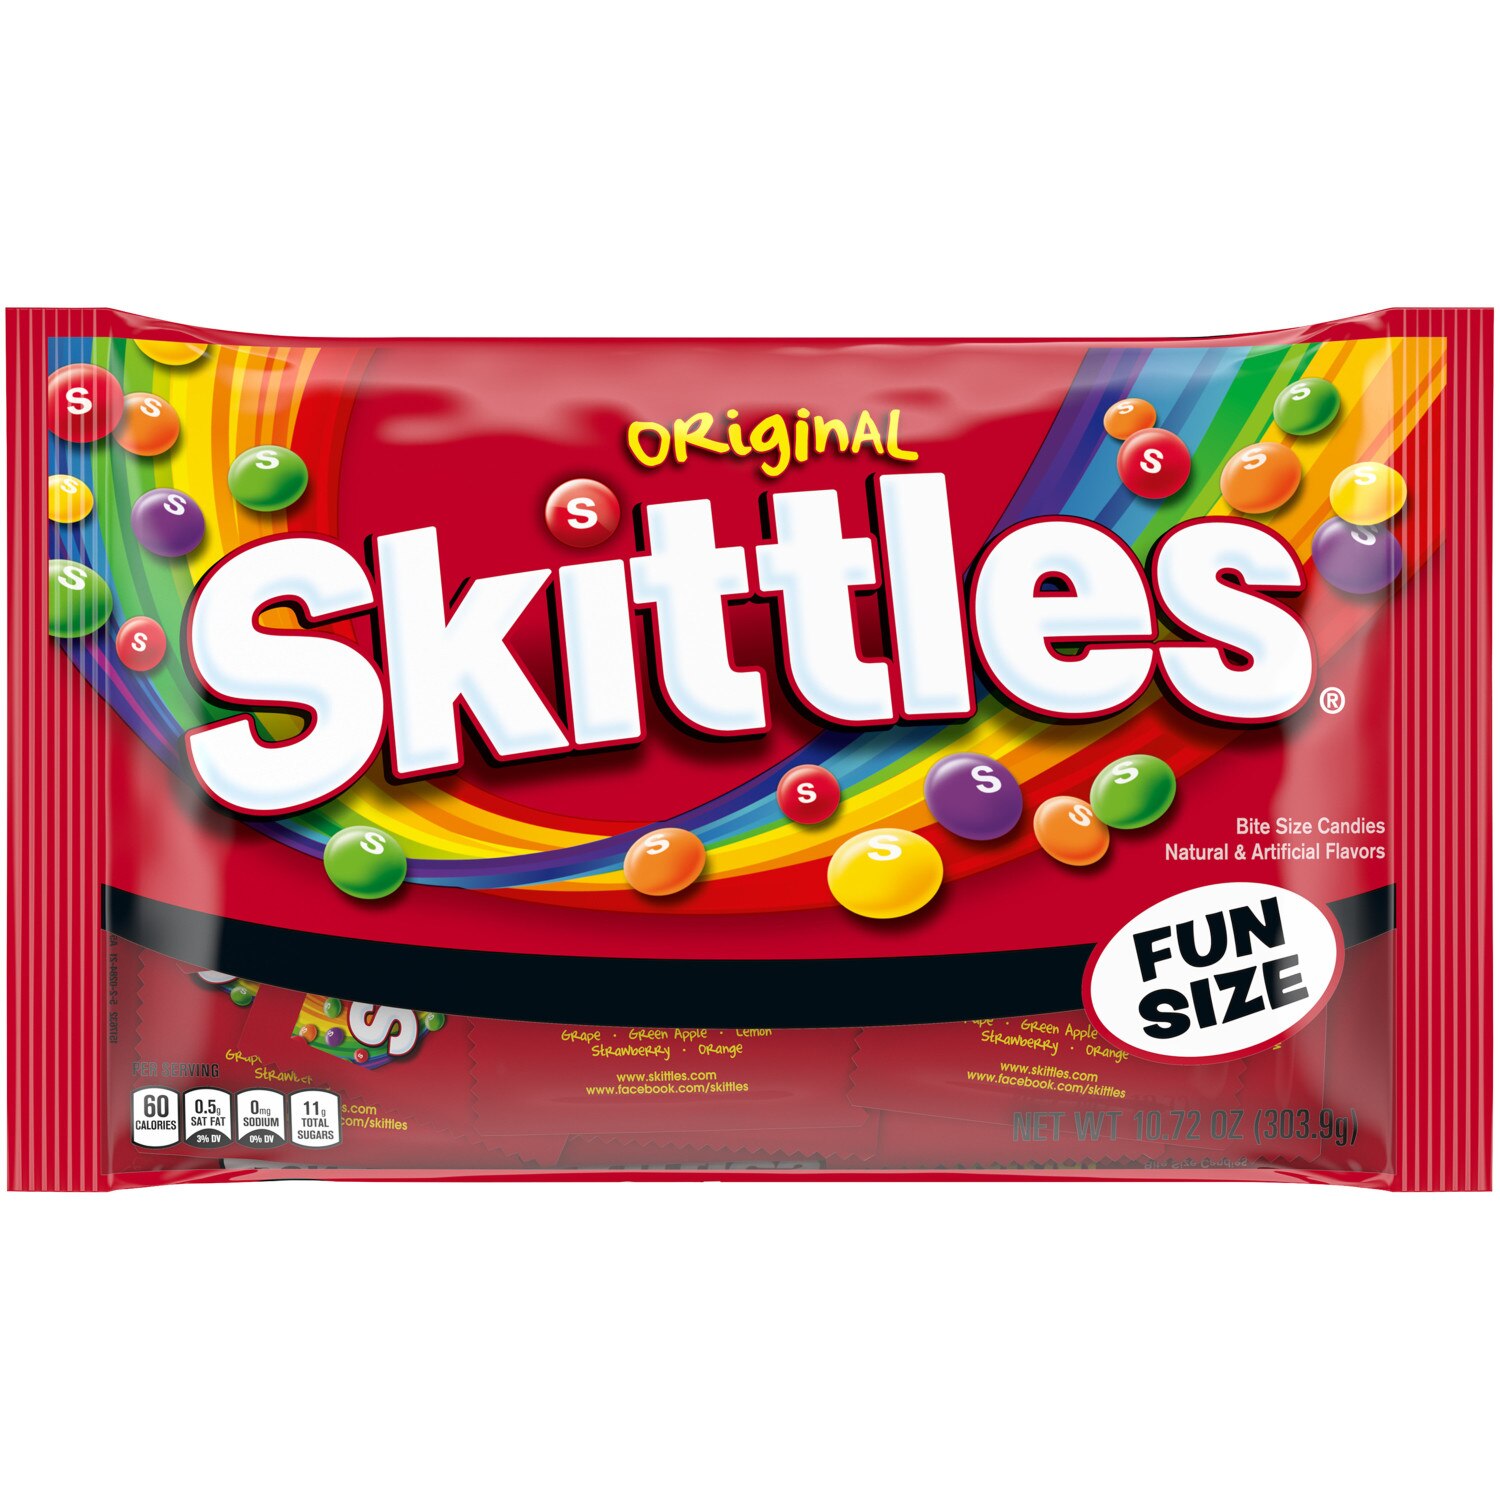 SKITTLES Original Chewy Fun Size Candy, 10.72 OZ